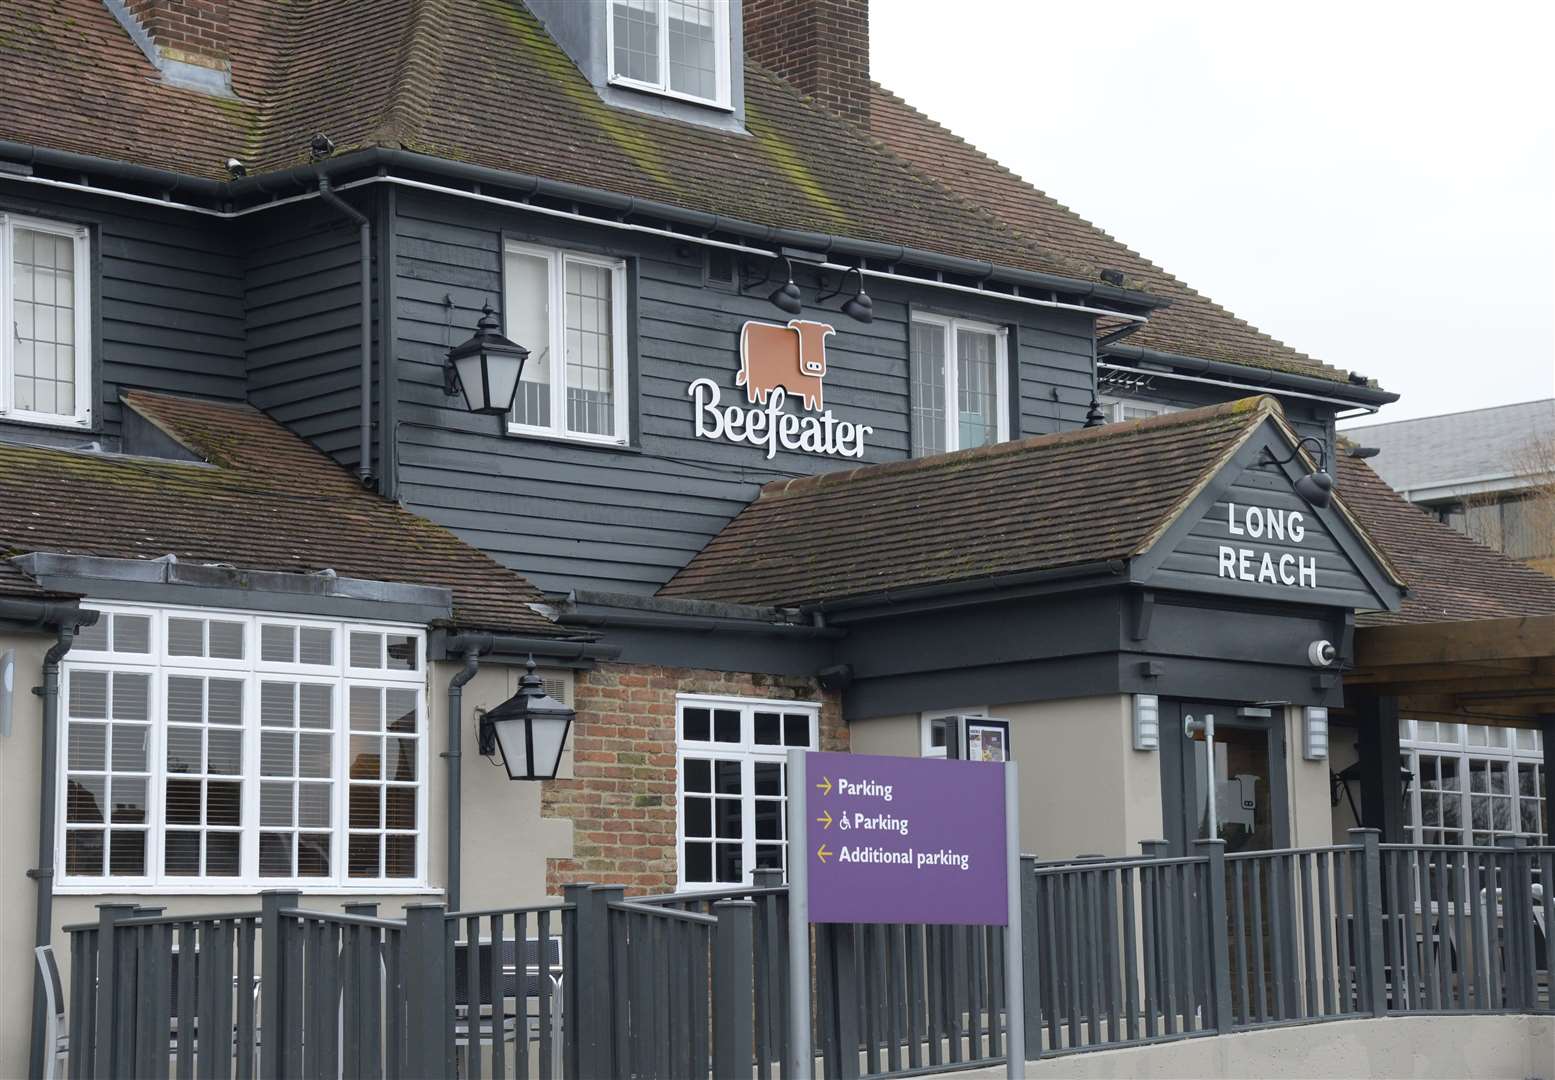 Long Reach Beefeater is said to be cancelling bookings. Picture: Chris Davey